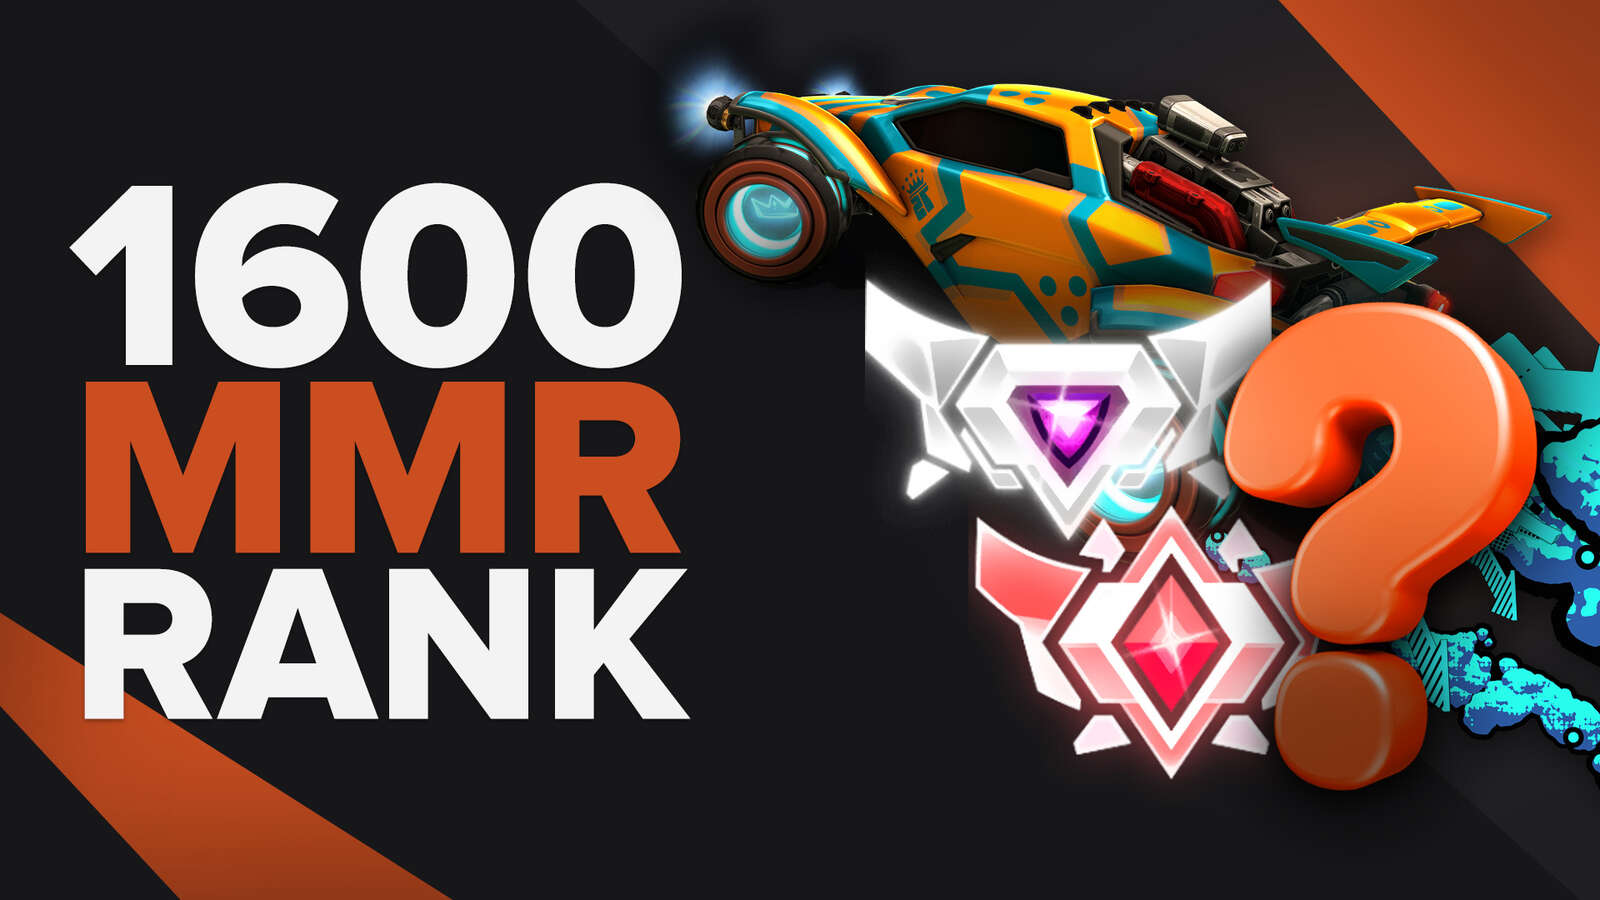 What is 1600 MMR and how do you get there?